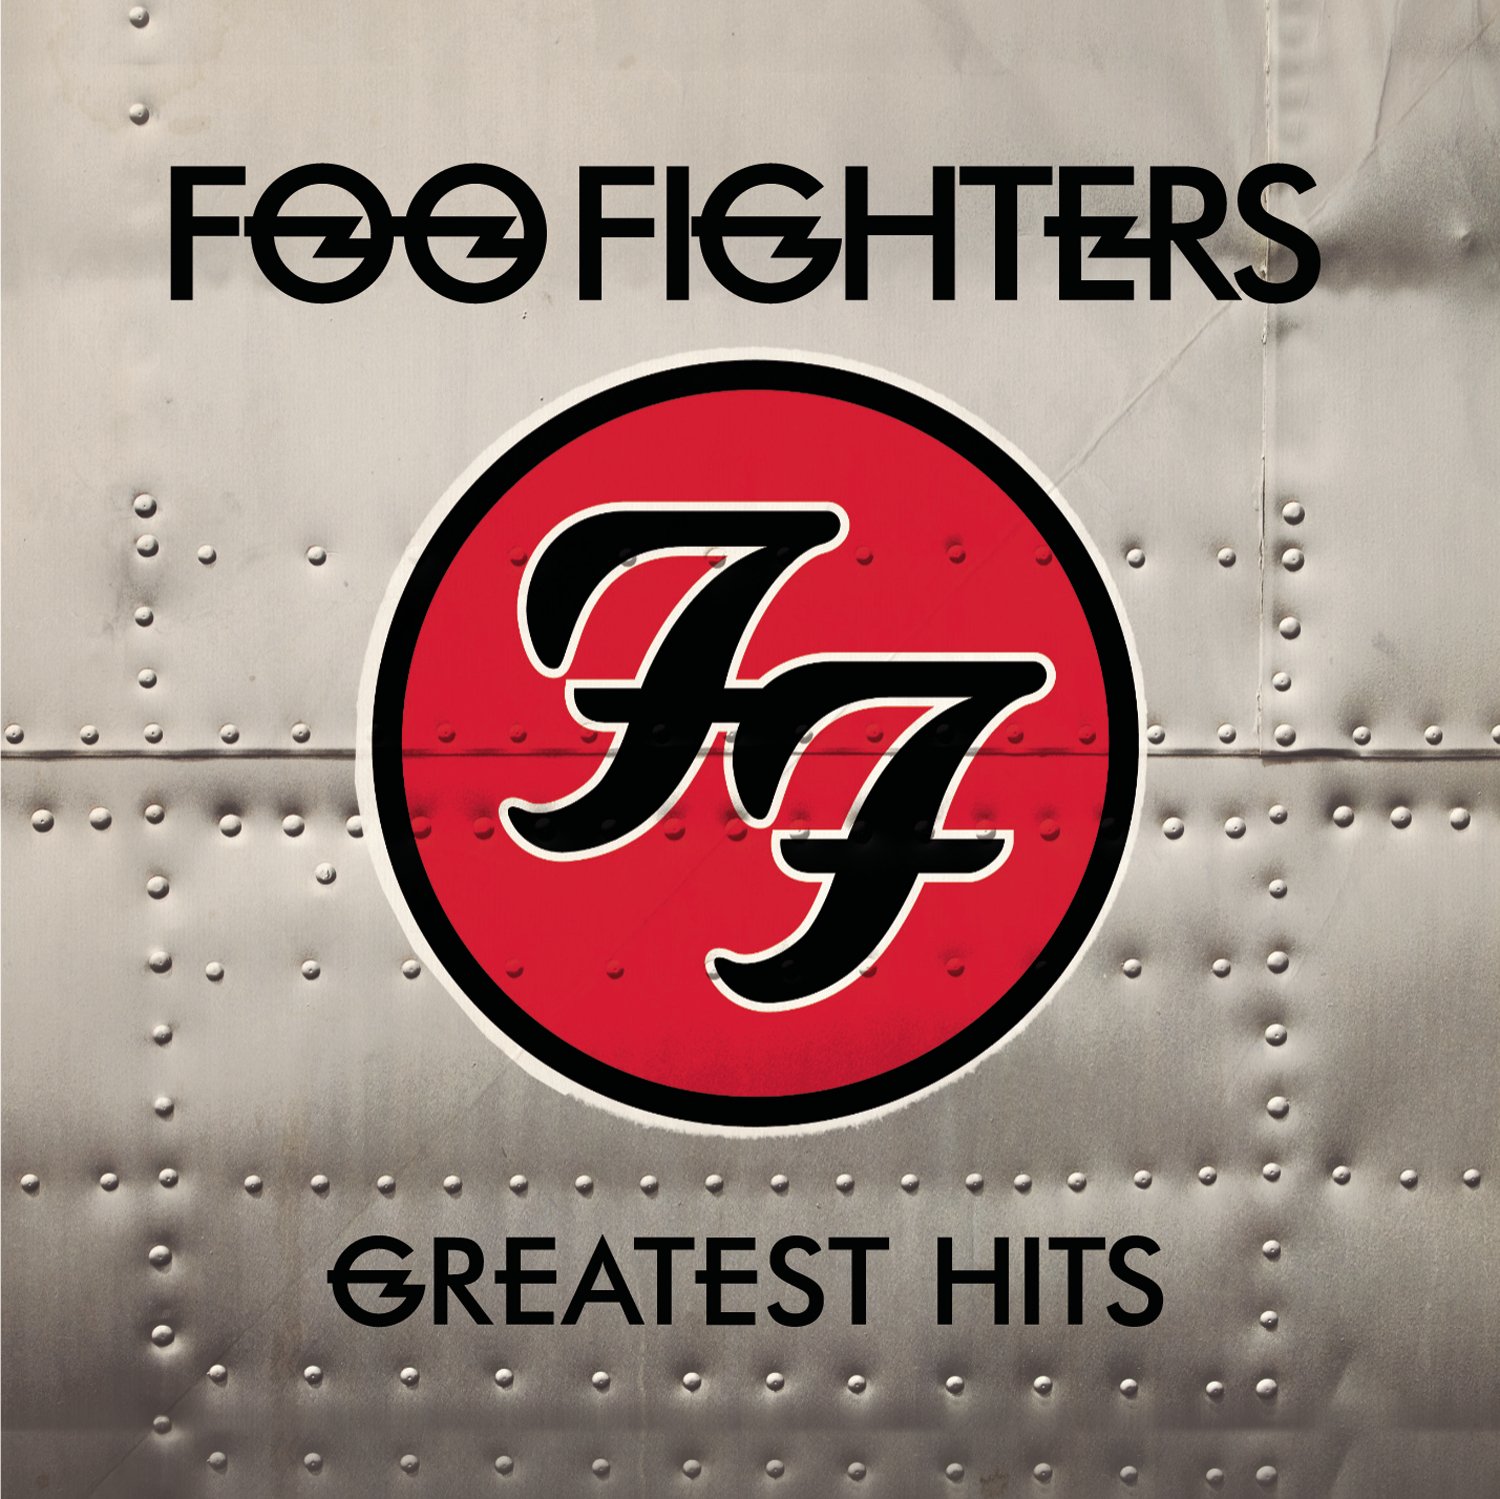 Foo Fighters "Greatest Hits" 2LP